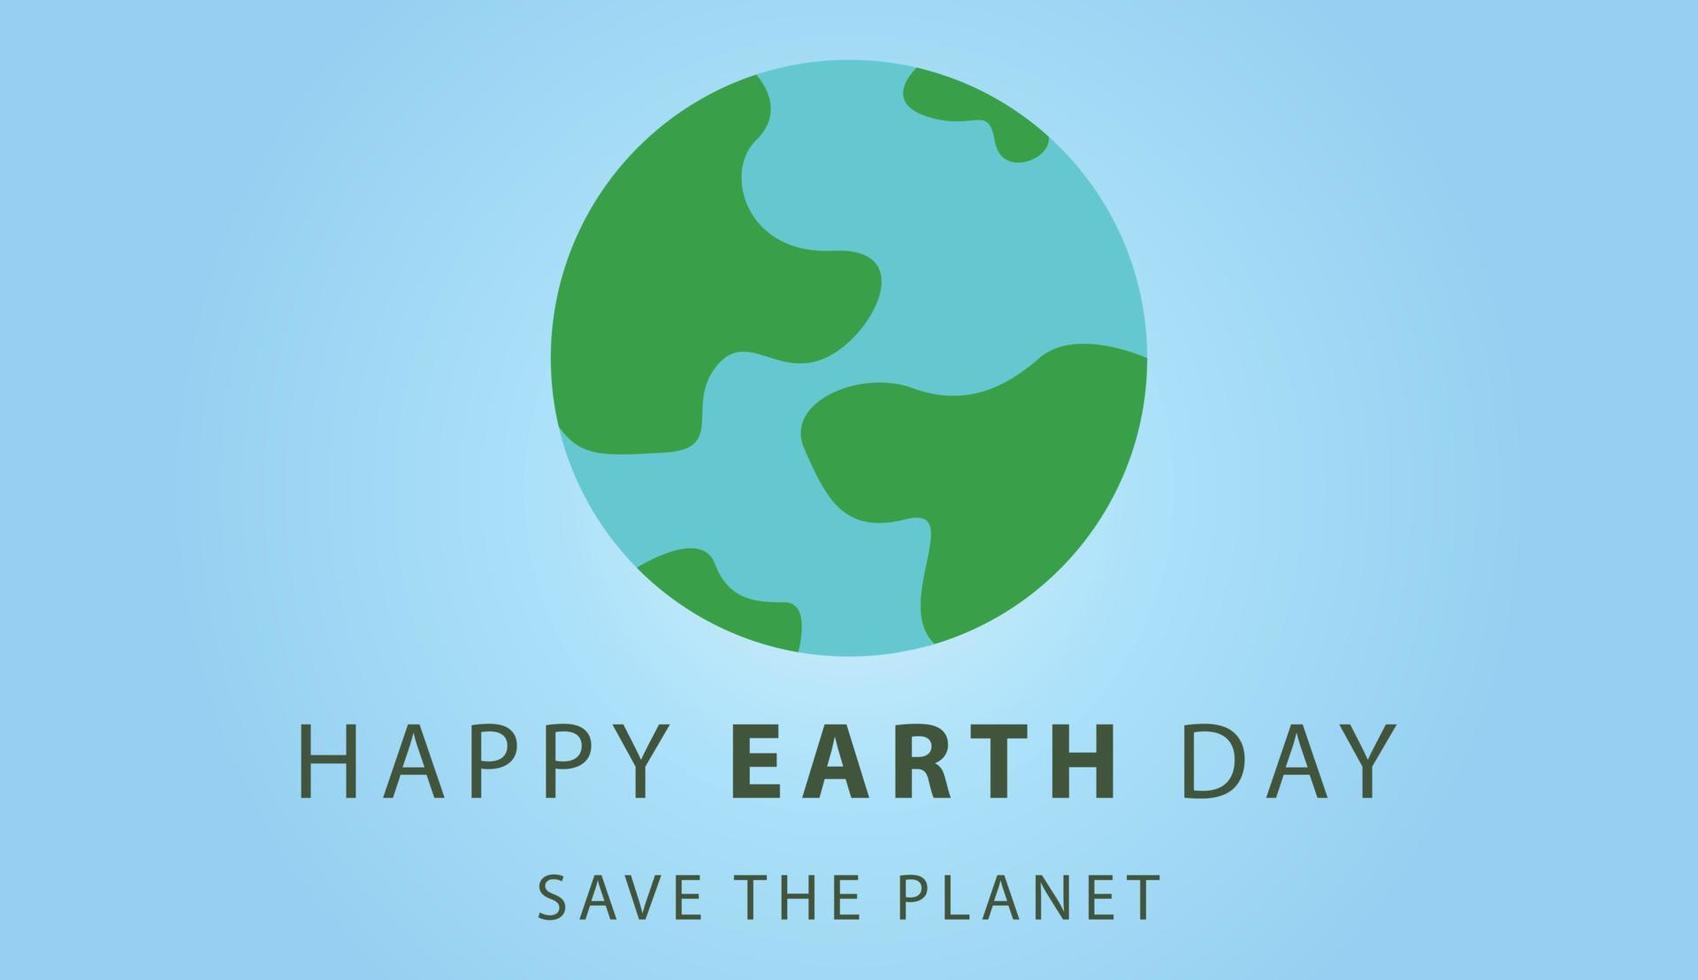 Poster celebration of Happy earth day. Save the planet. Vector illustration